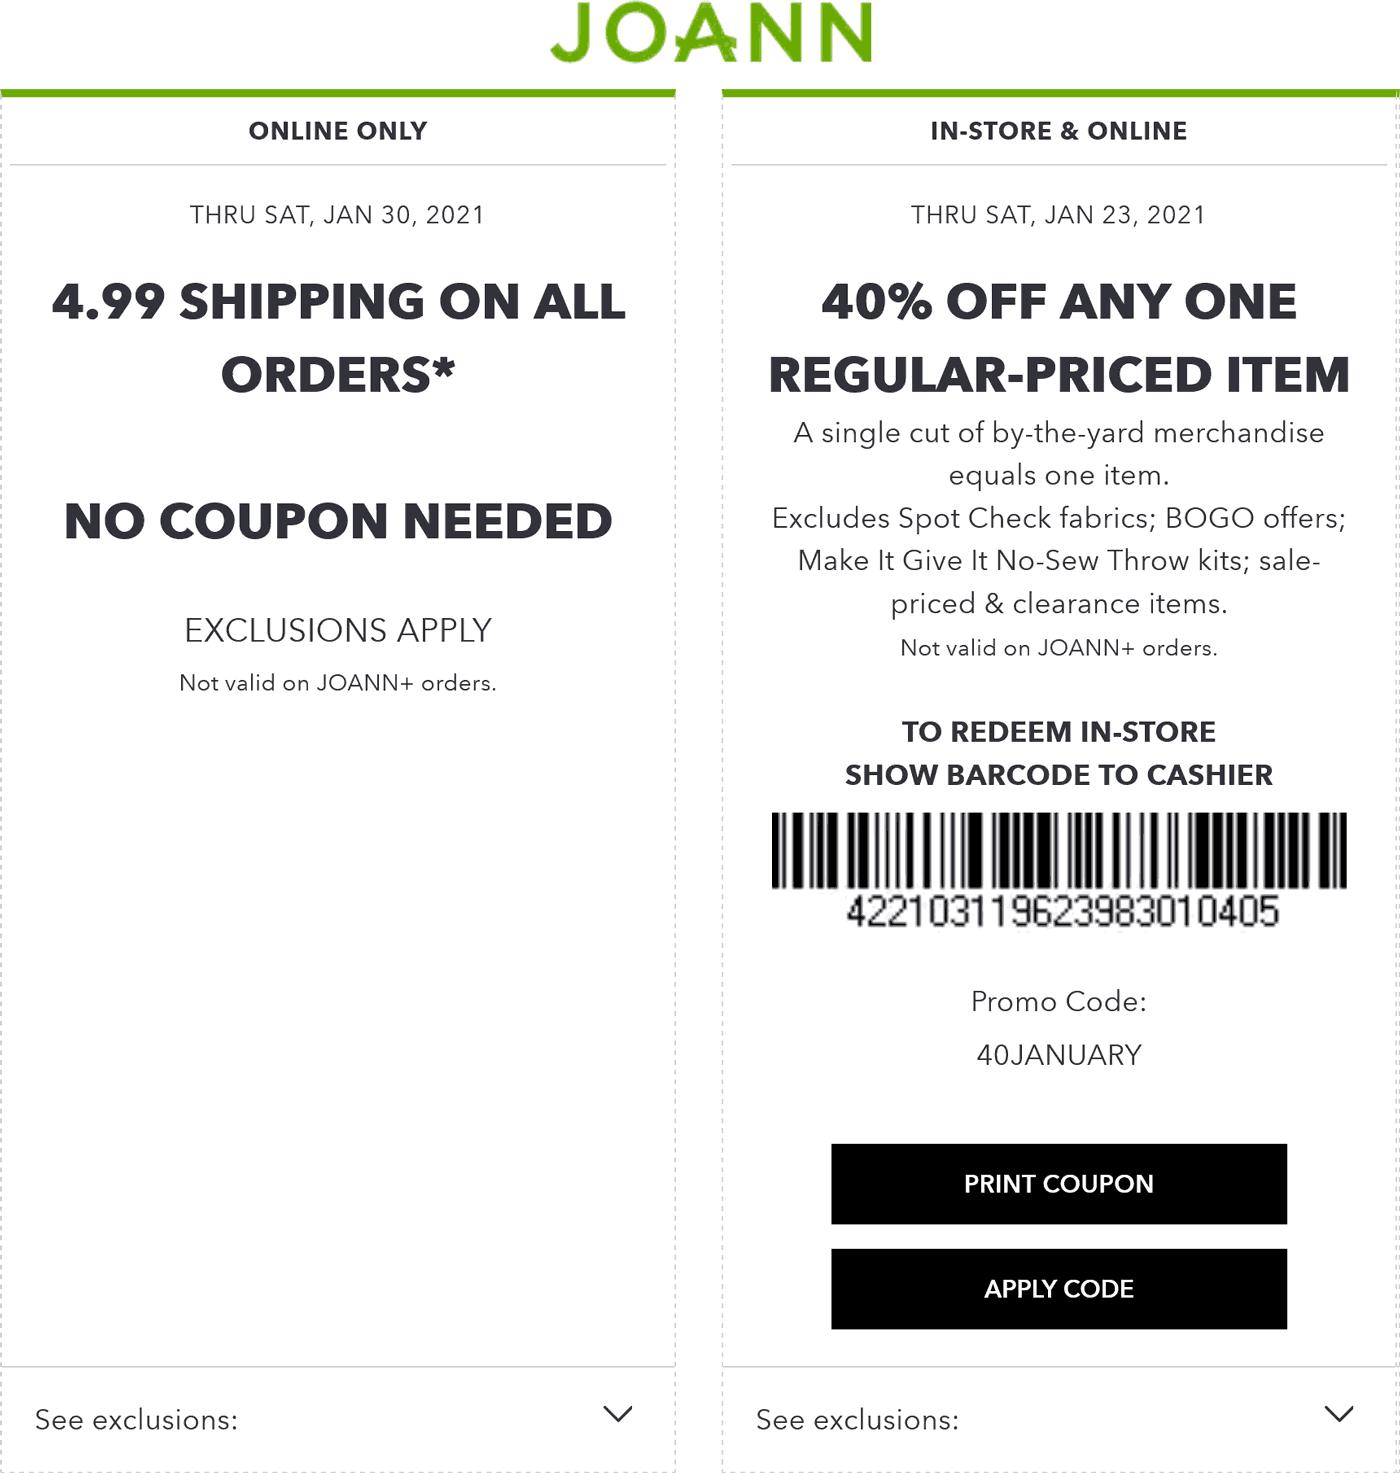 Joann stores Coupon  40% off a single item at Joann, or 50% fabric online via promo code 50FABRICHP & 40% everything via EVERYTHINGHP #joann 